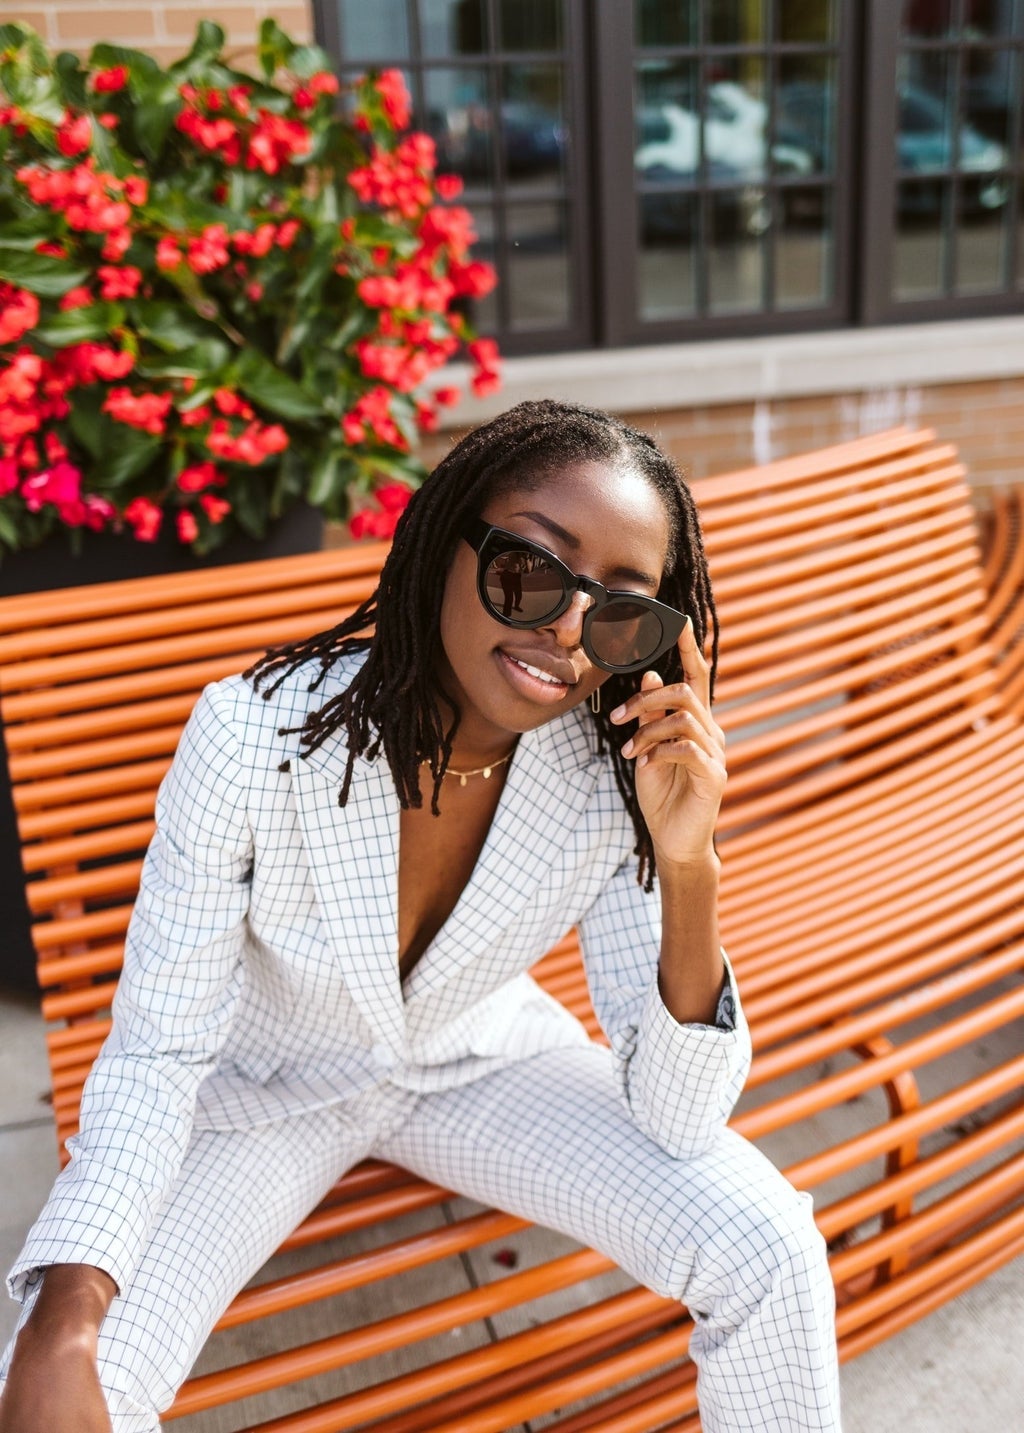 Woman in suit and sunglasses sitting on bench